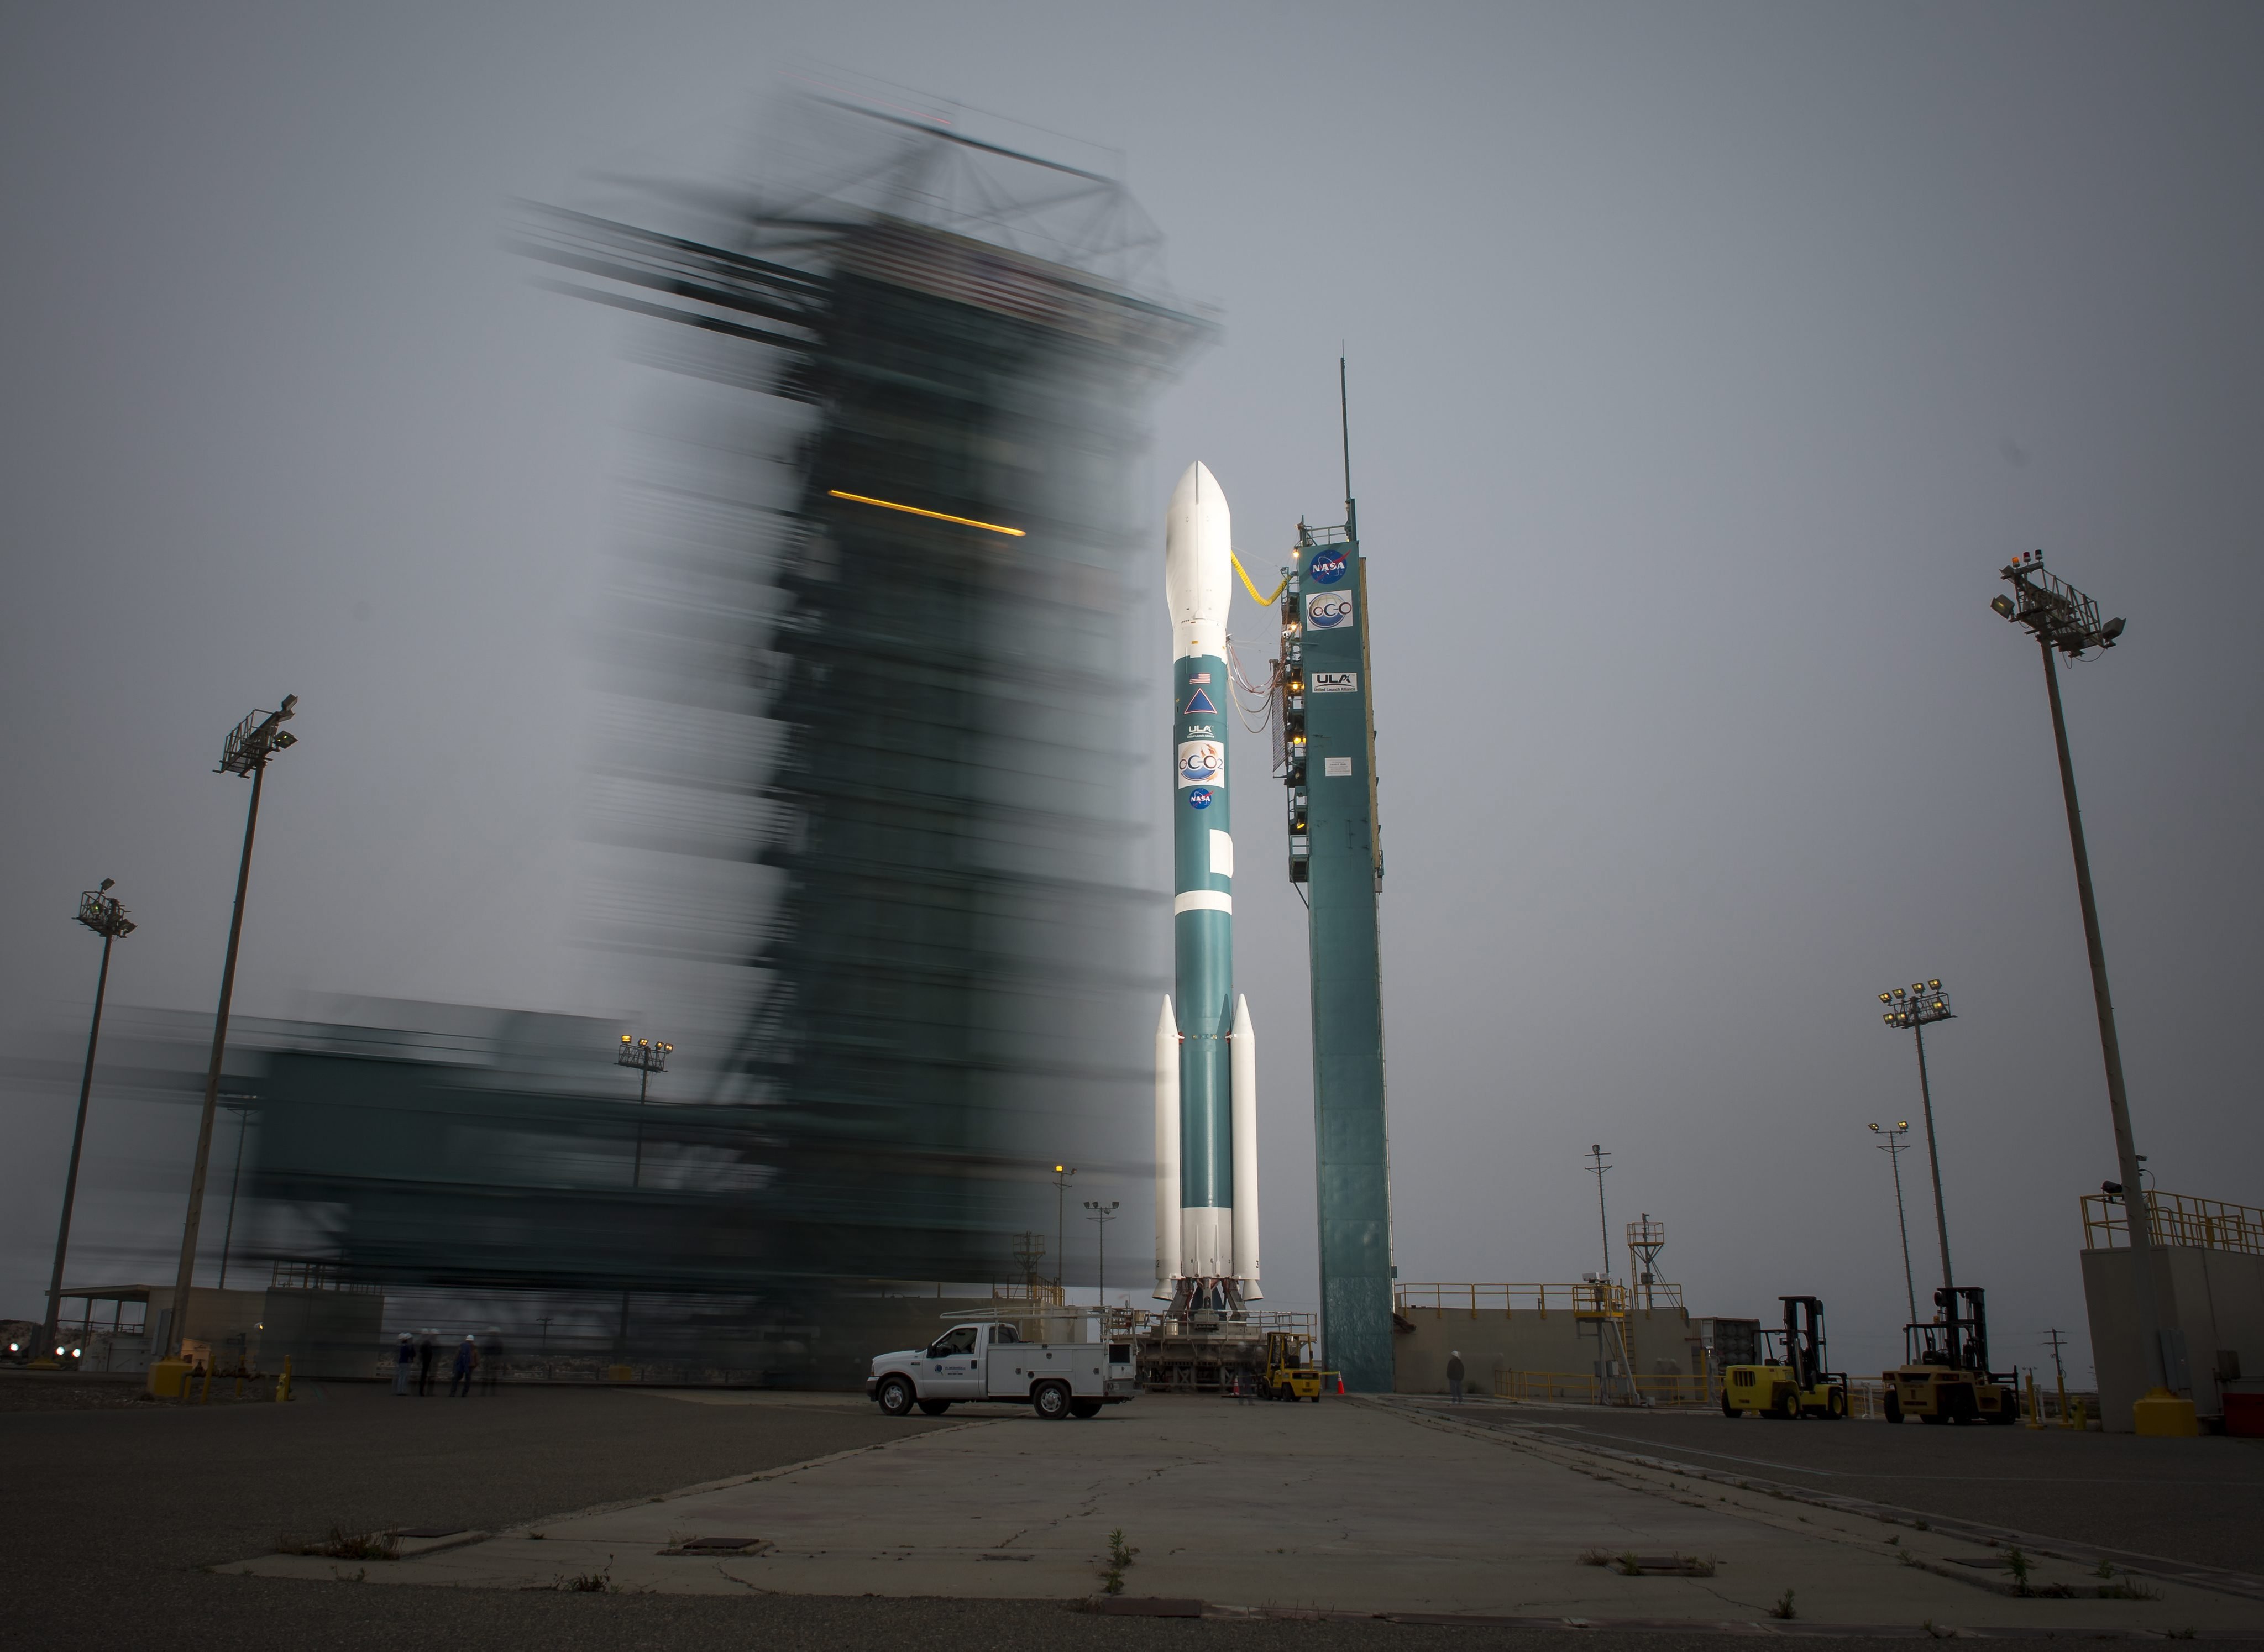 The launch gantry is rolled back to reveal the United Launch Alliance Delta II rocket with the Orbiting Carbon Observatory-2 (OCO-2) satellite onboard, at the Space Launch Complex Two, of the Vandenberg Air Force Base, California,  on June 30, 2014. (NASA/Bill Ingalls&mdash;EPA)